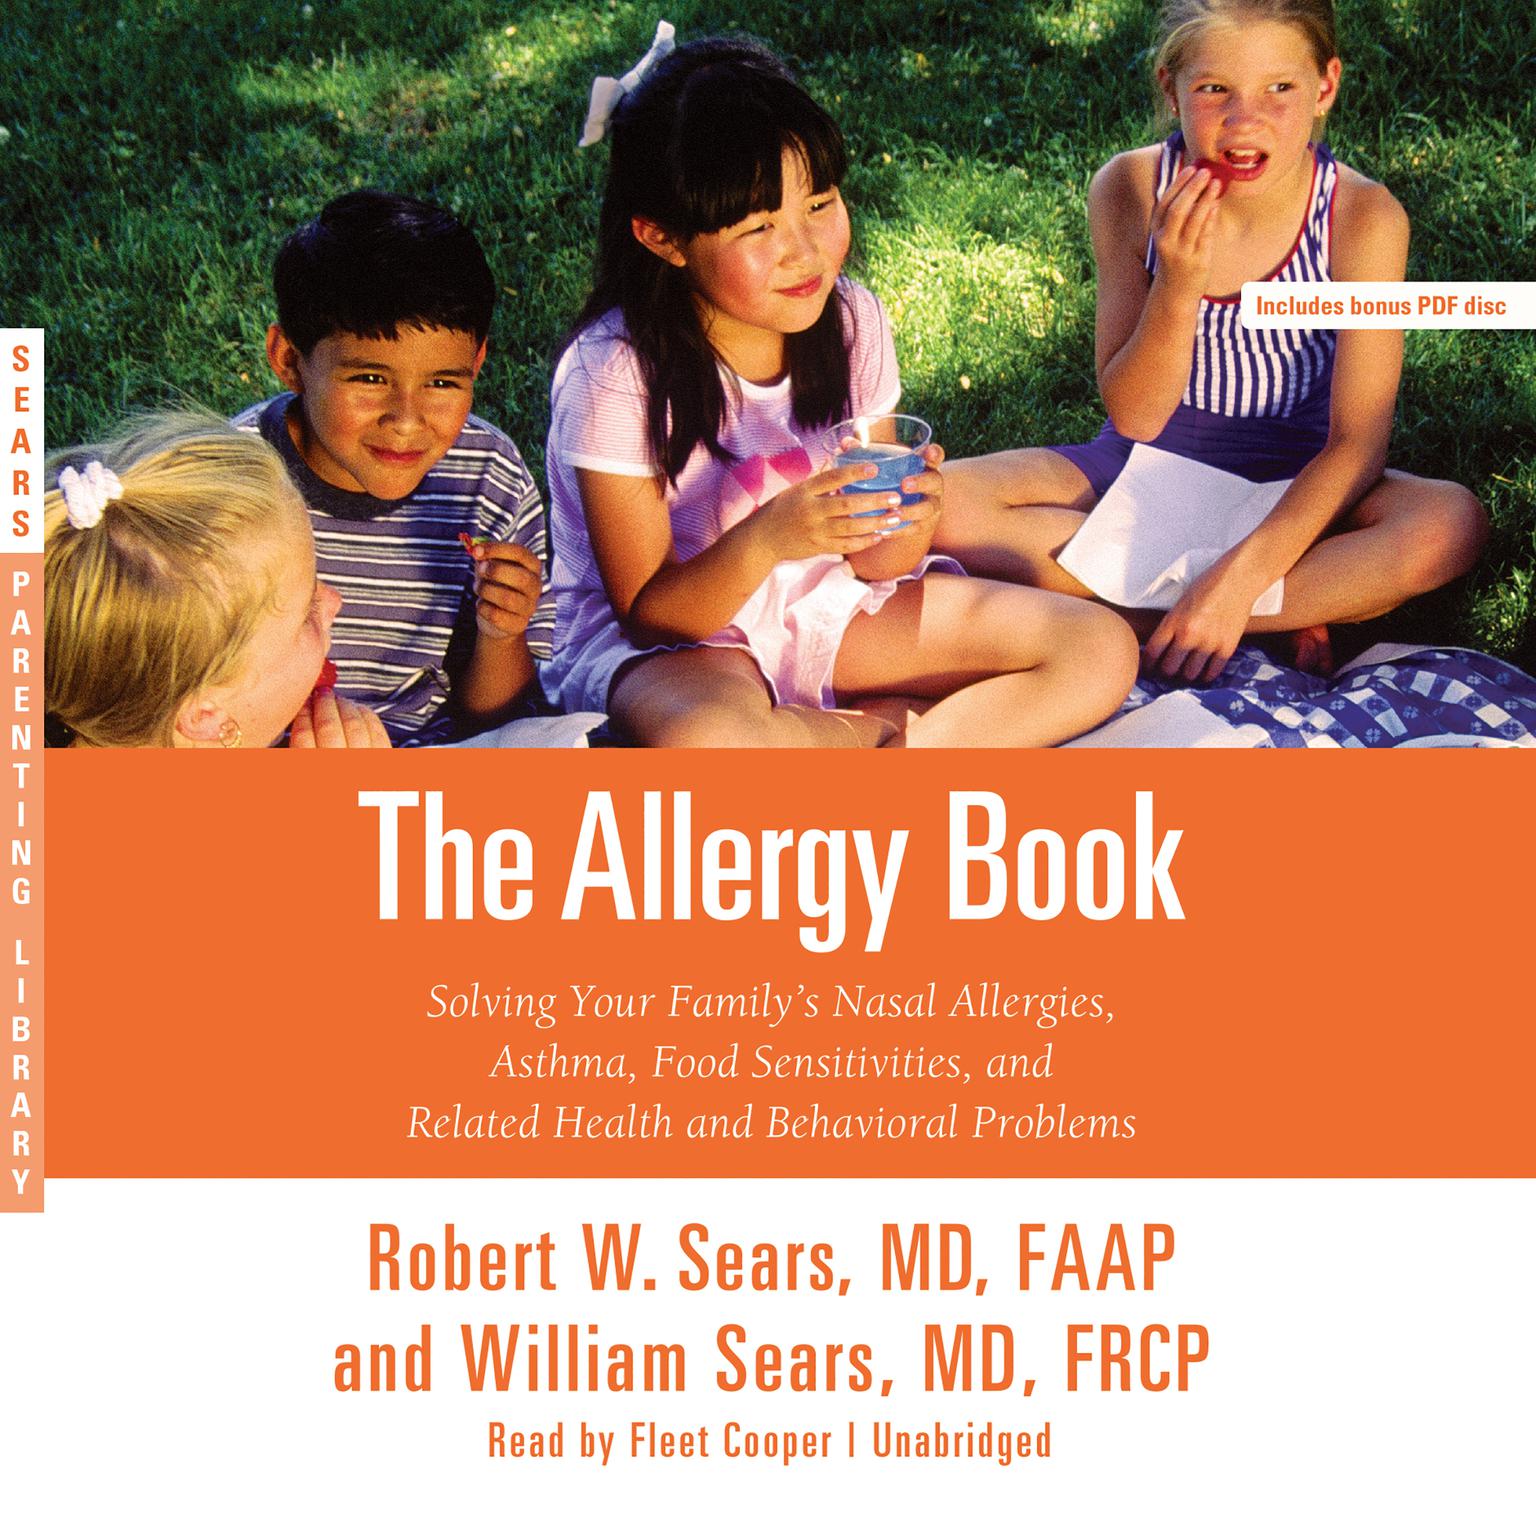 The Allergy Book: Solving Your Familys Nasal Allergies, Asthma, Food Sensitivities, and Related Health and Behavioral Problems Audiobook, by Robert W. Sears